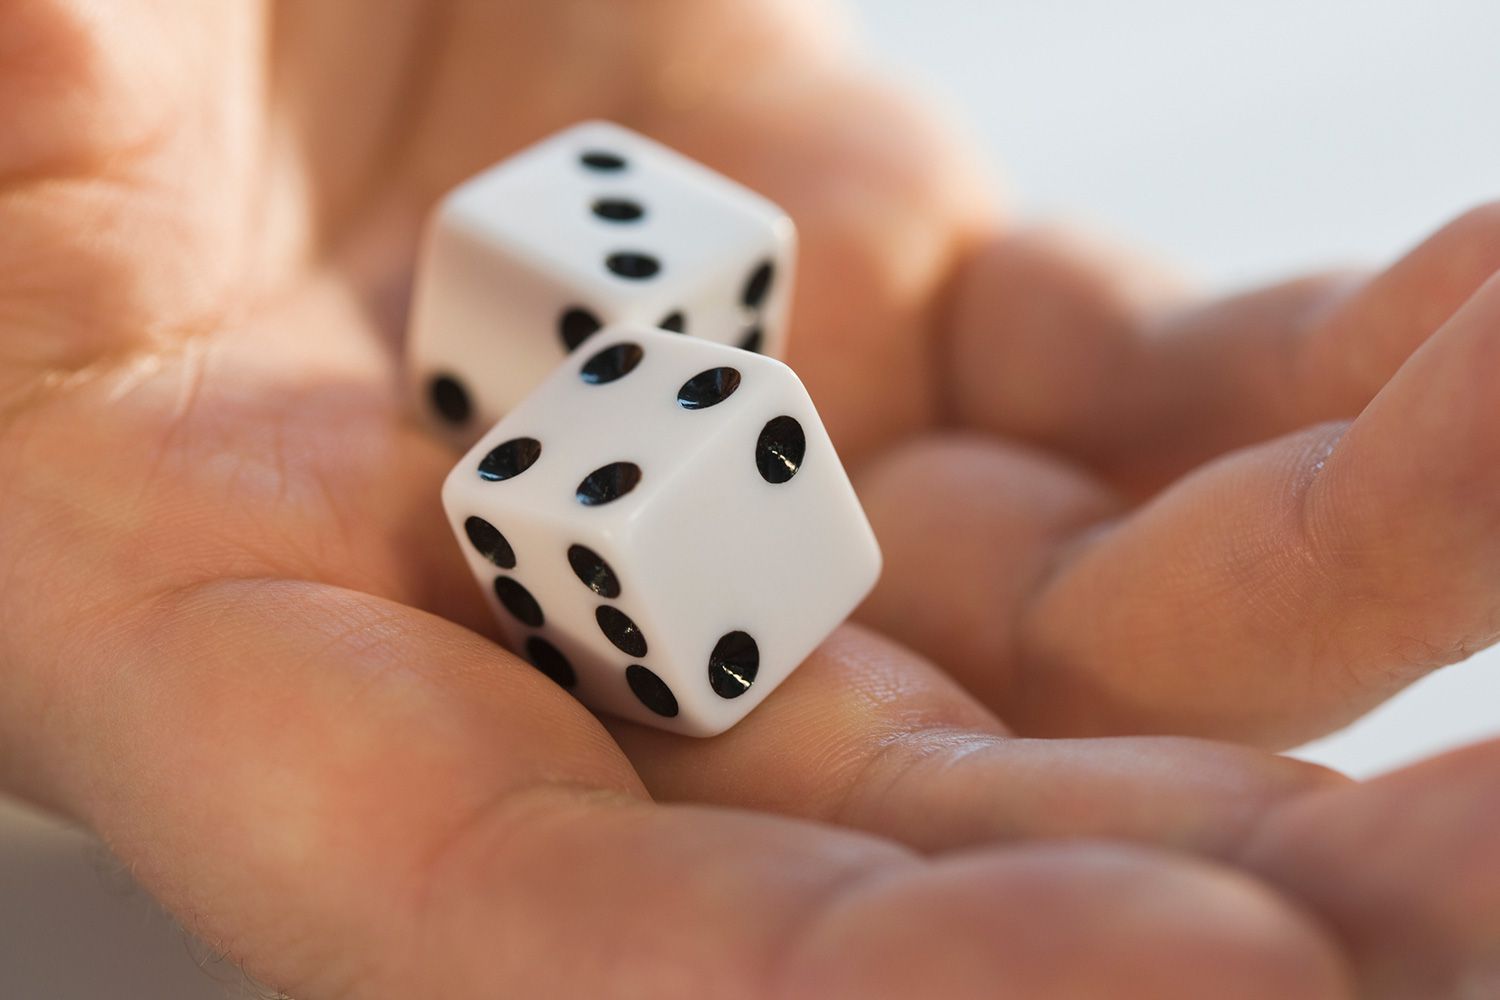 Probabilities for Rolling Two Dice